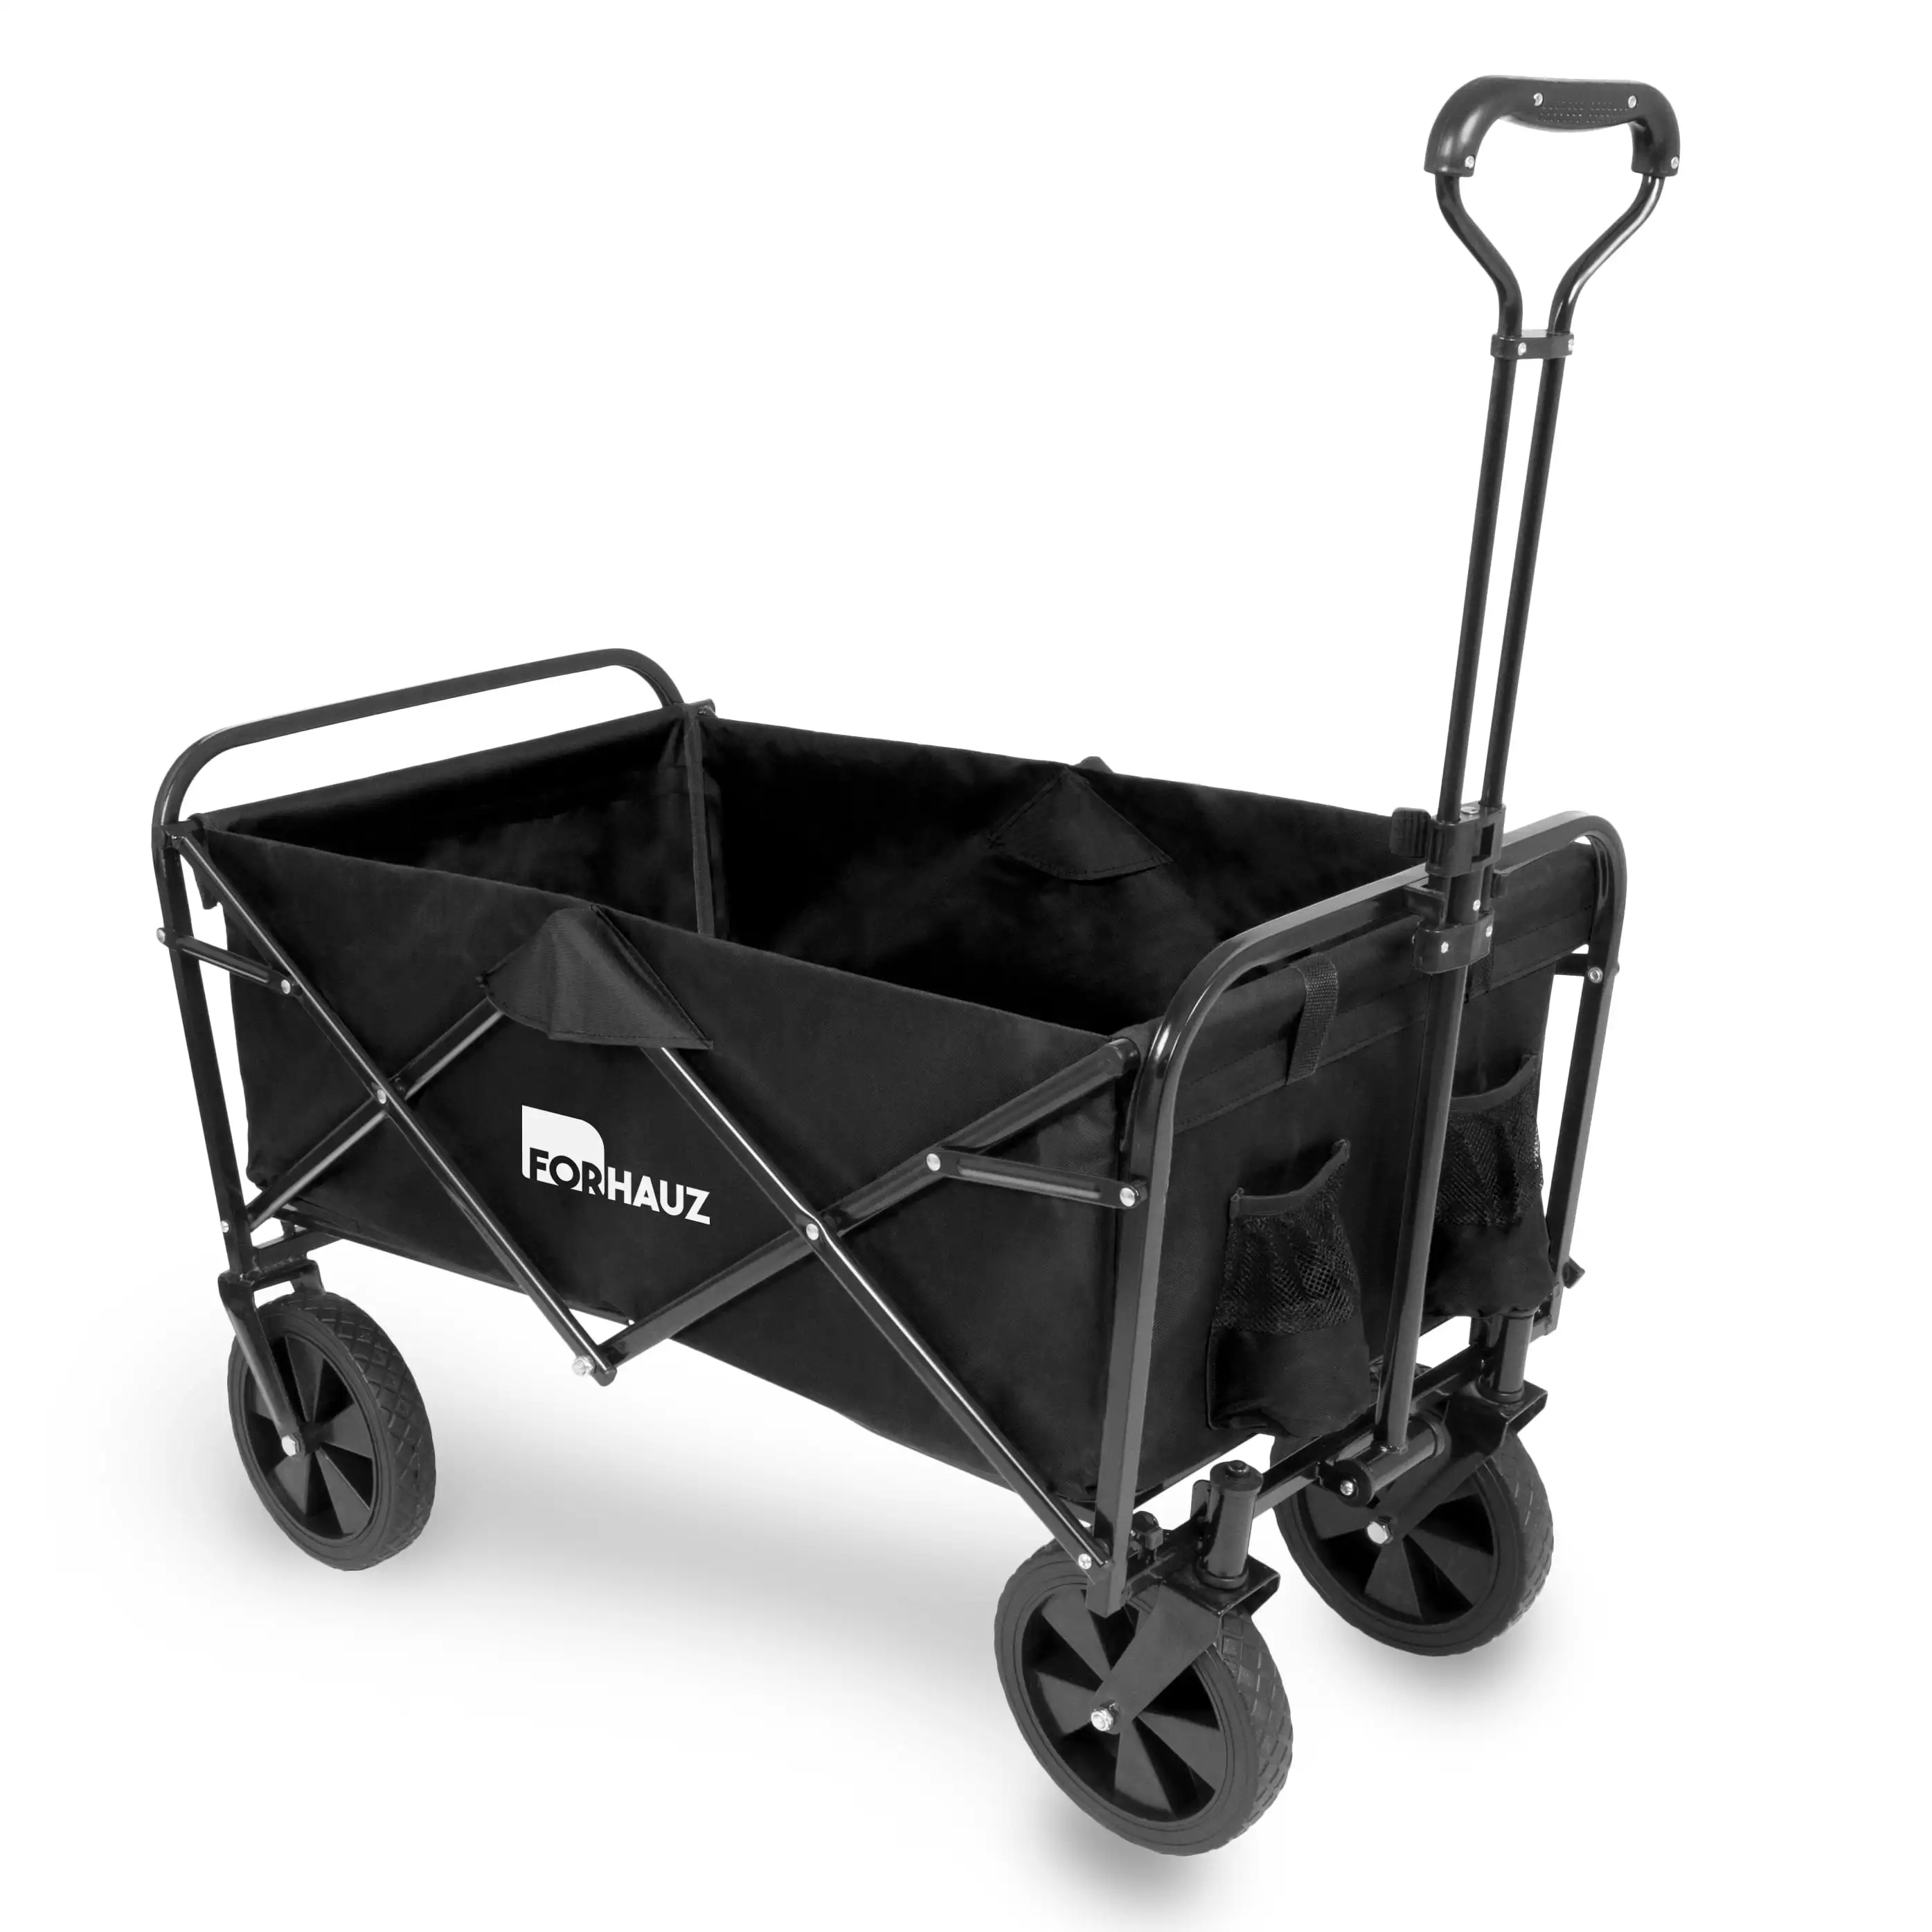 Folding Collapsible Wagon Yard Cart for Utility, Beach, and Garden